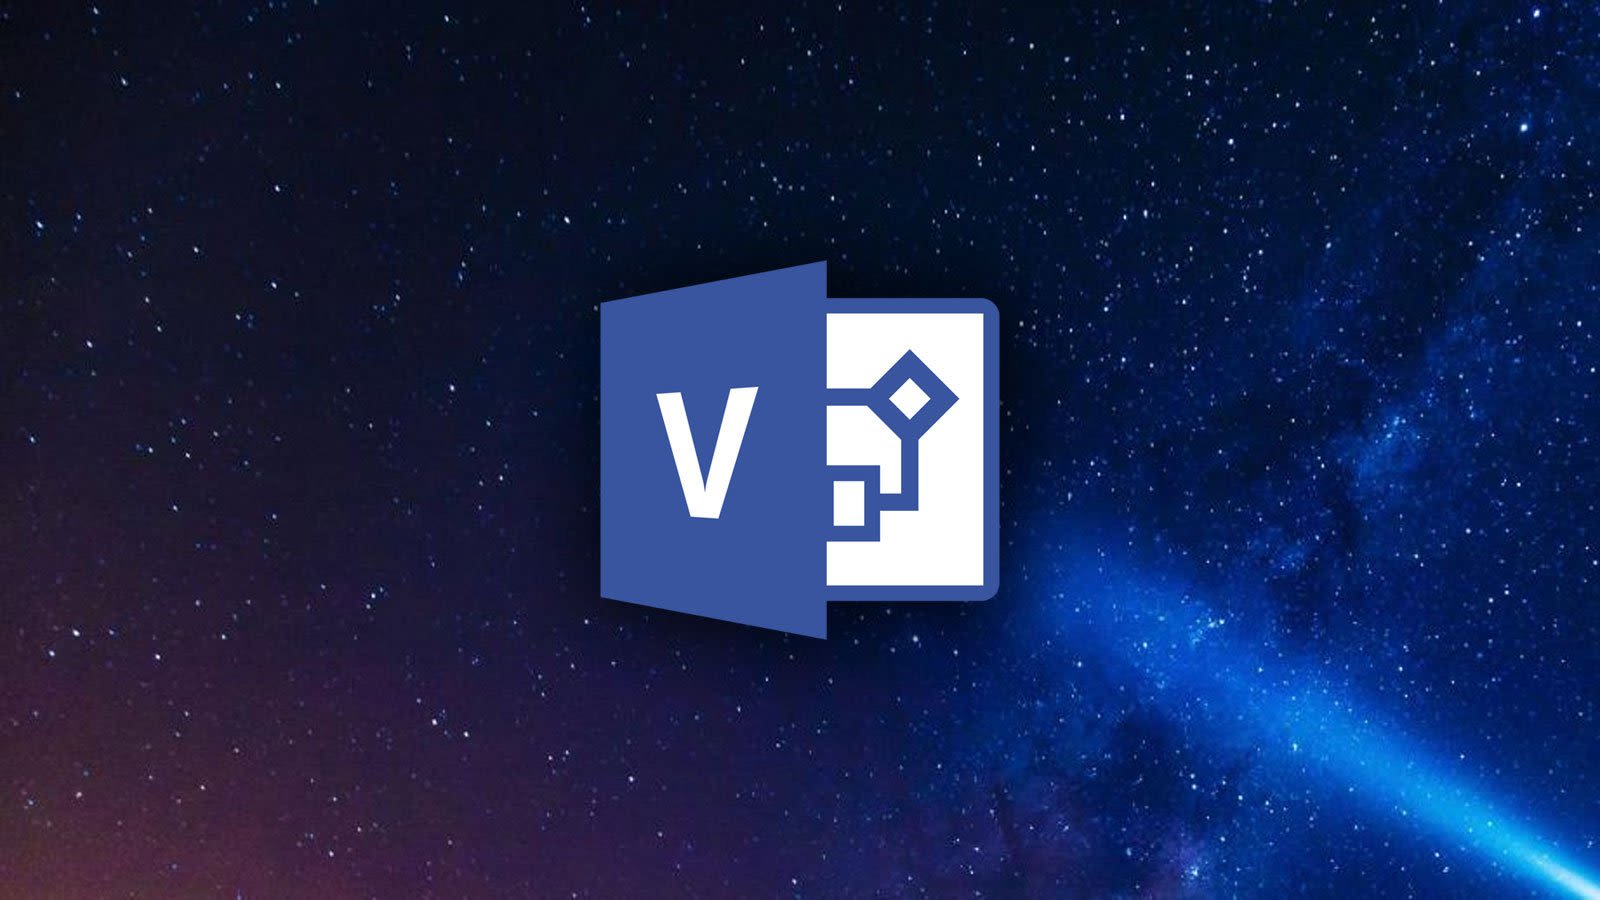 Create up-to-date visualizations with $230 off Microsoft Visio 2021